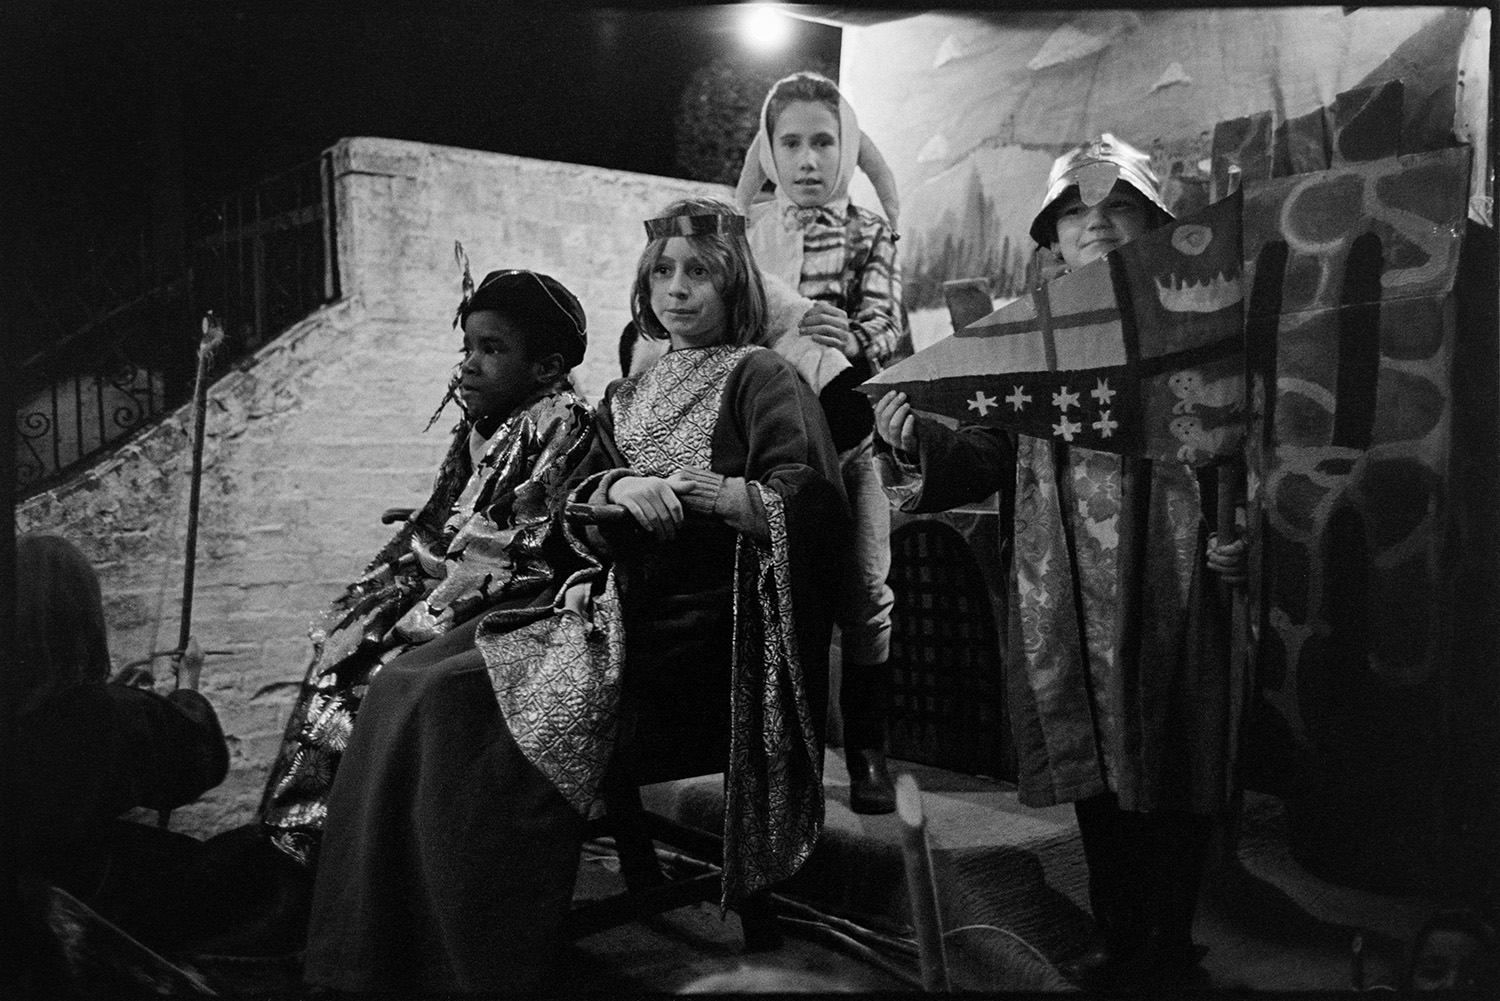 Carnival floats at night with flares being lit. 
[Children dressed as a King, Queen, Courtier and Jester on a carnival float at Hatherleigh Carnival, at night.]